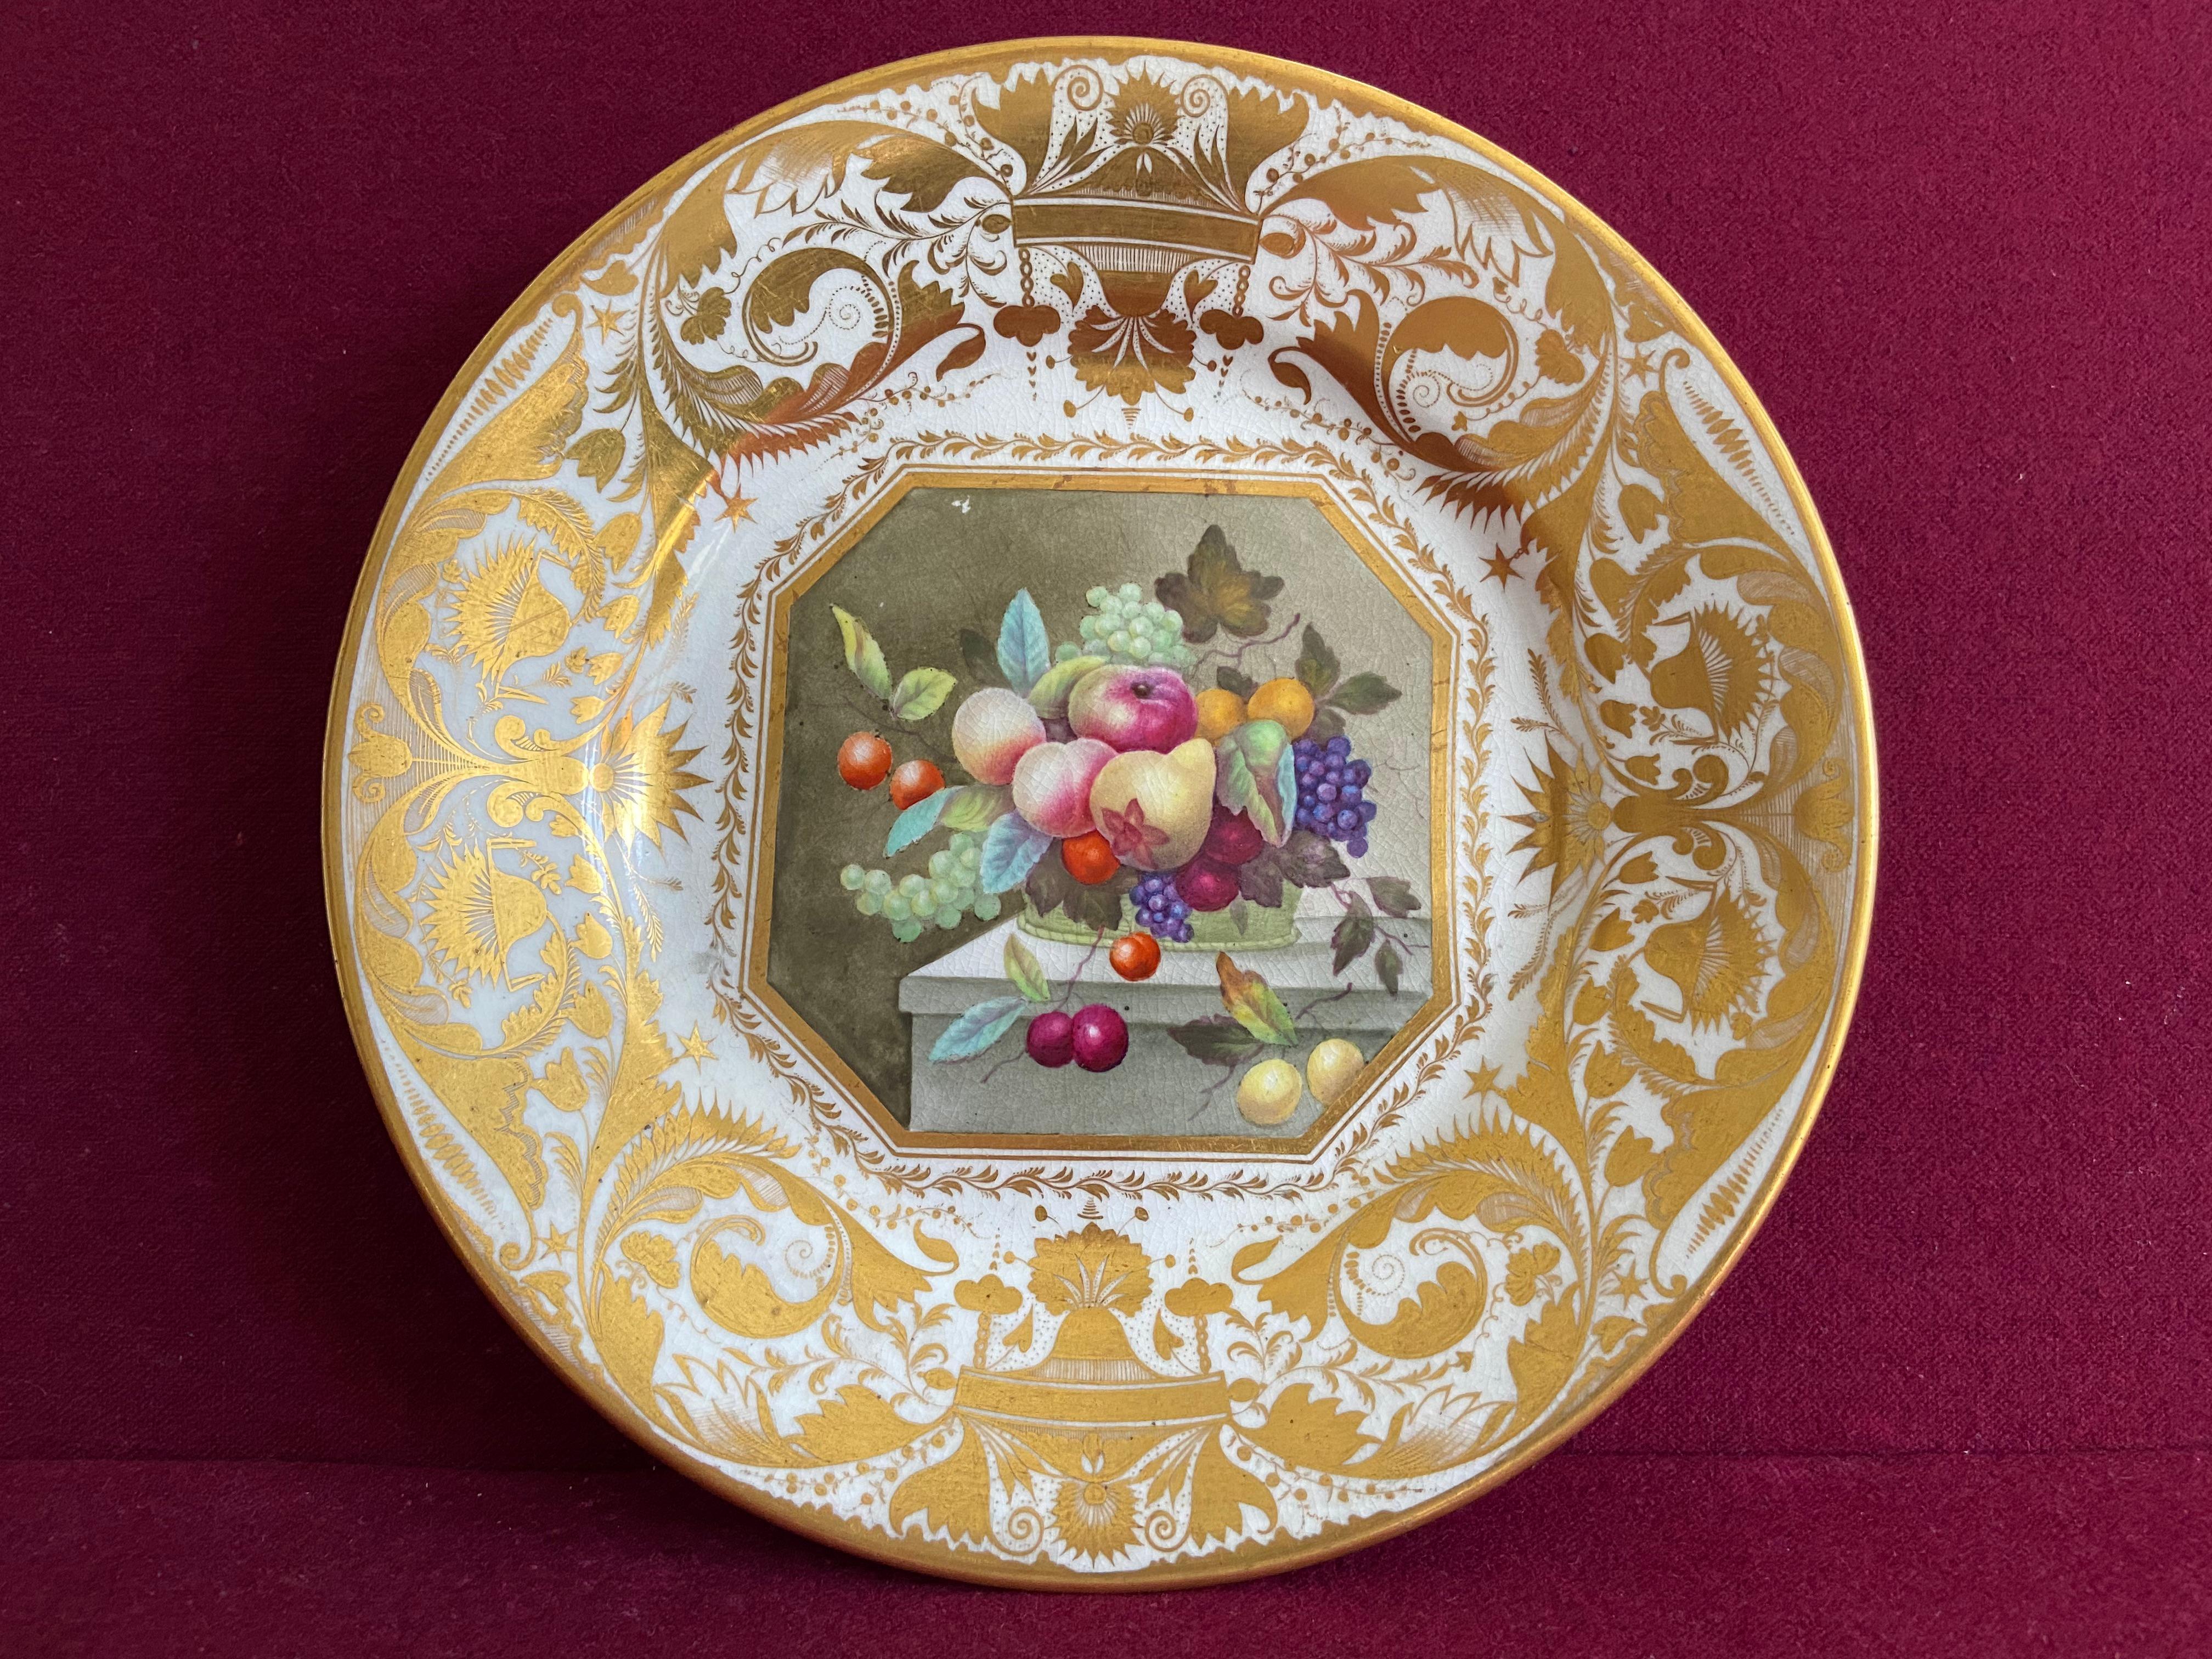 A very fine Derby porcelain dessert plate c.1815. Deecorated by Thomas Steel with a panel of fruits in a wicker basket on top of a marble table. The border decorated with rich elaborate gilding. Crimson Derby mark to the underside of the